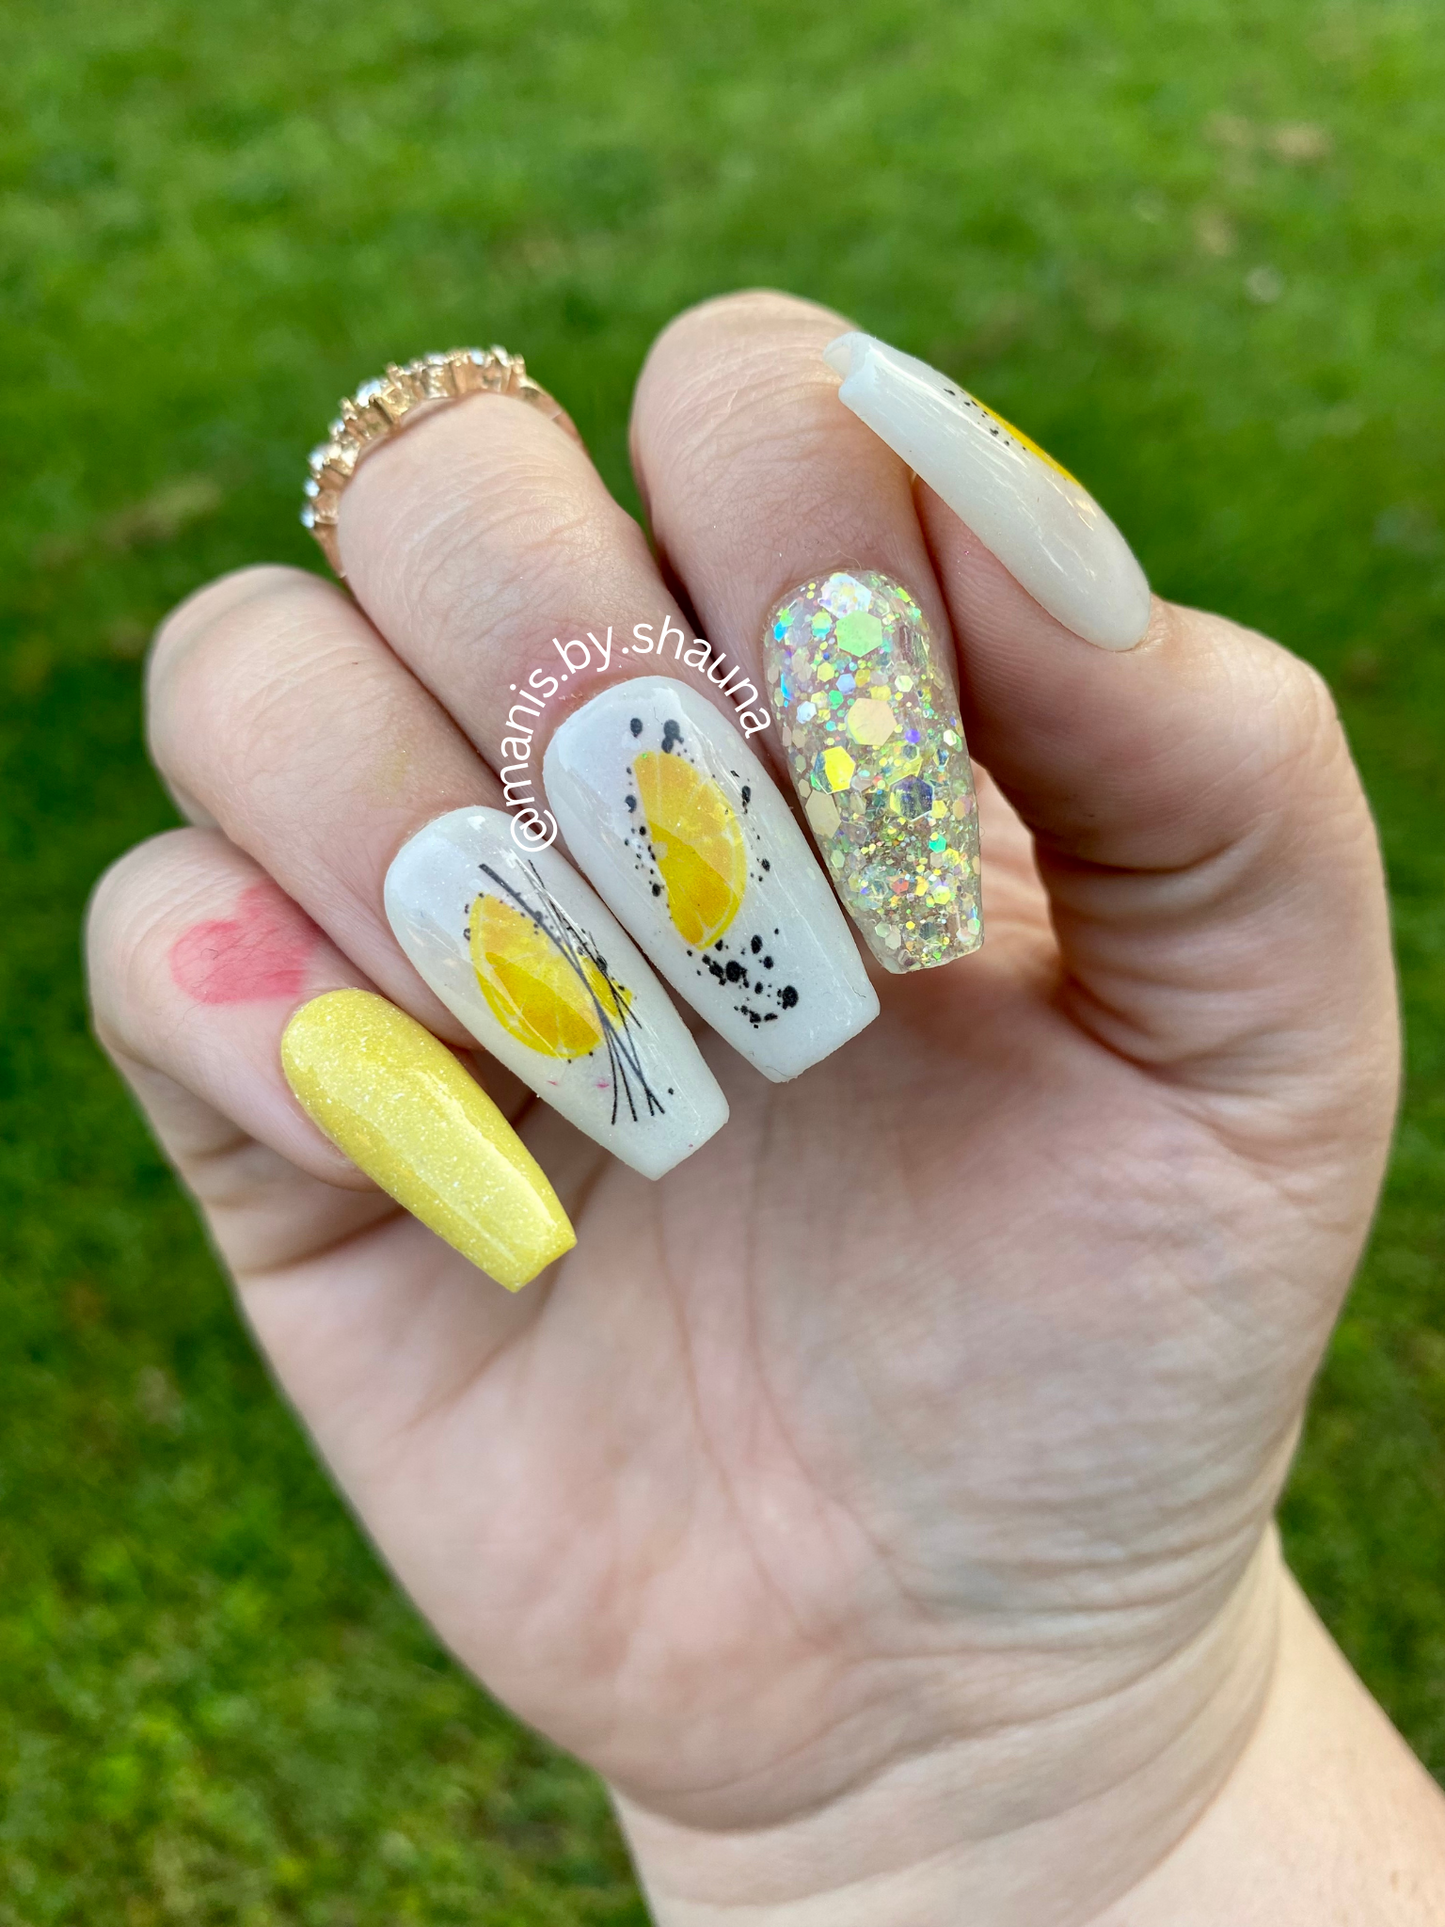 When Summer Gives You Lemons- Nail Art Decals